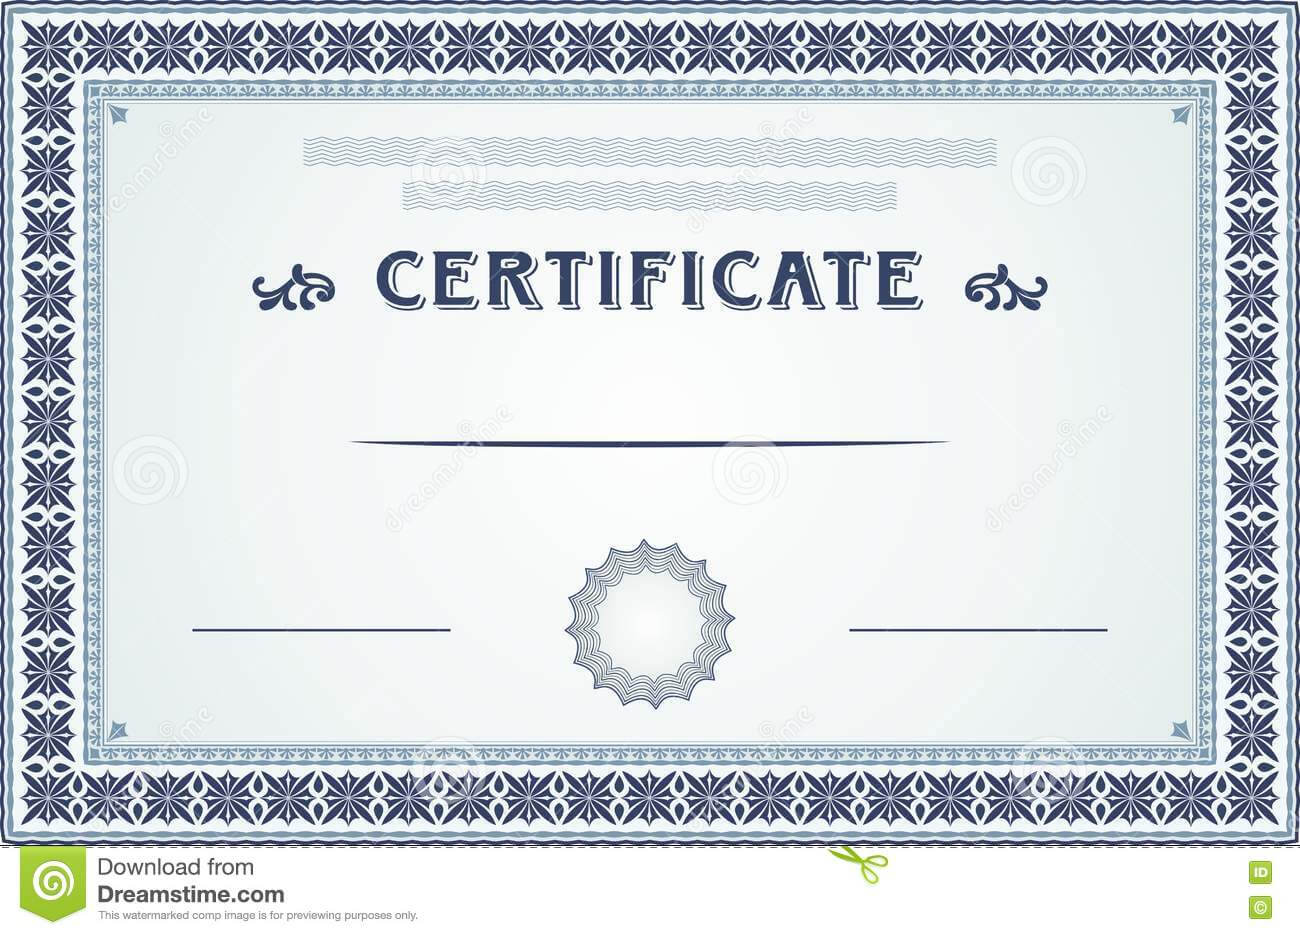 Certificate Border And Template Design Stock Vector Pertaining To Certificate Border Design Templates